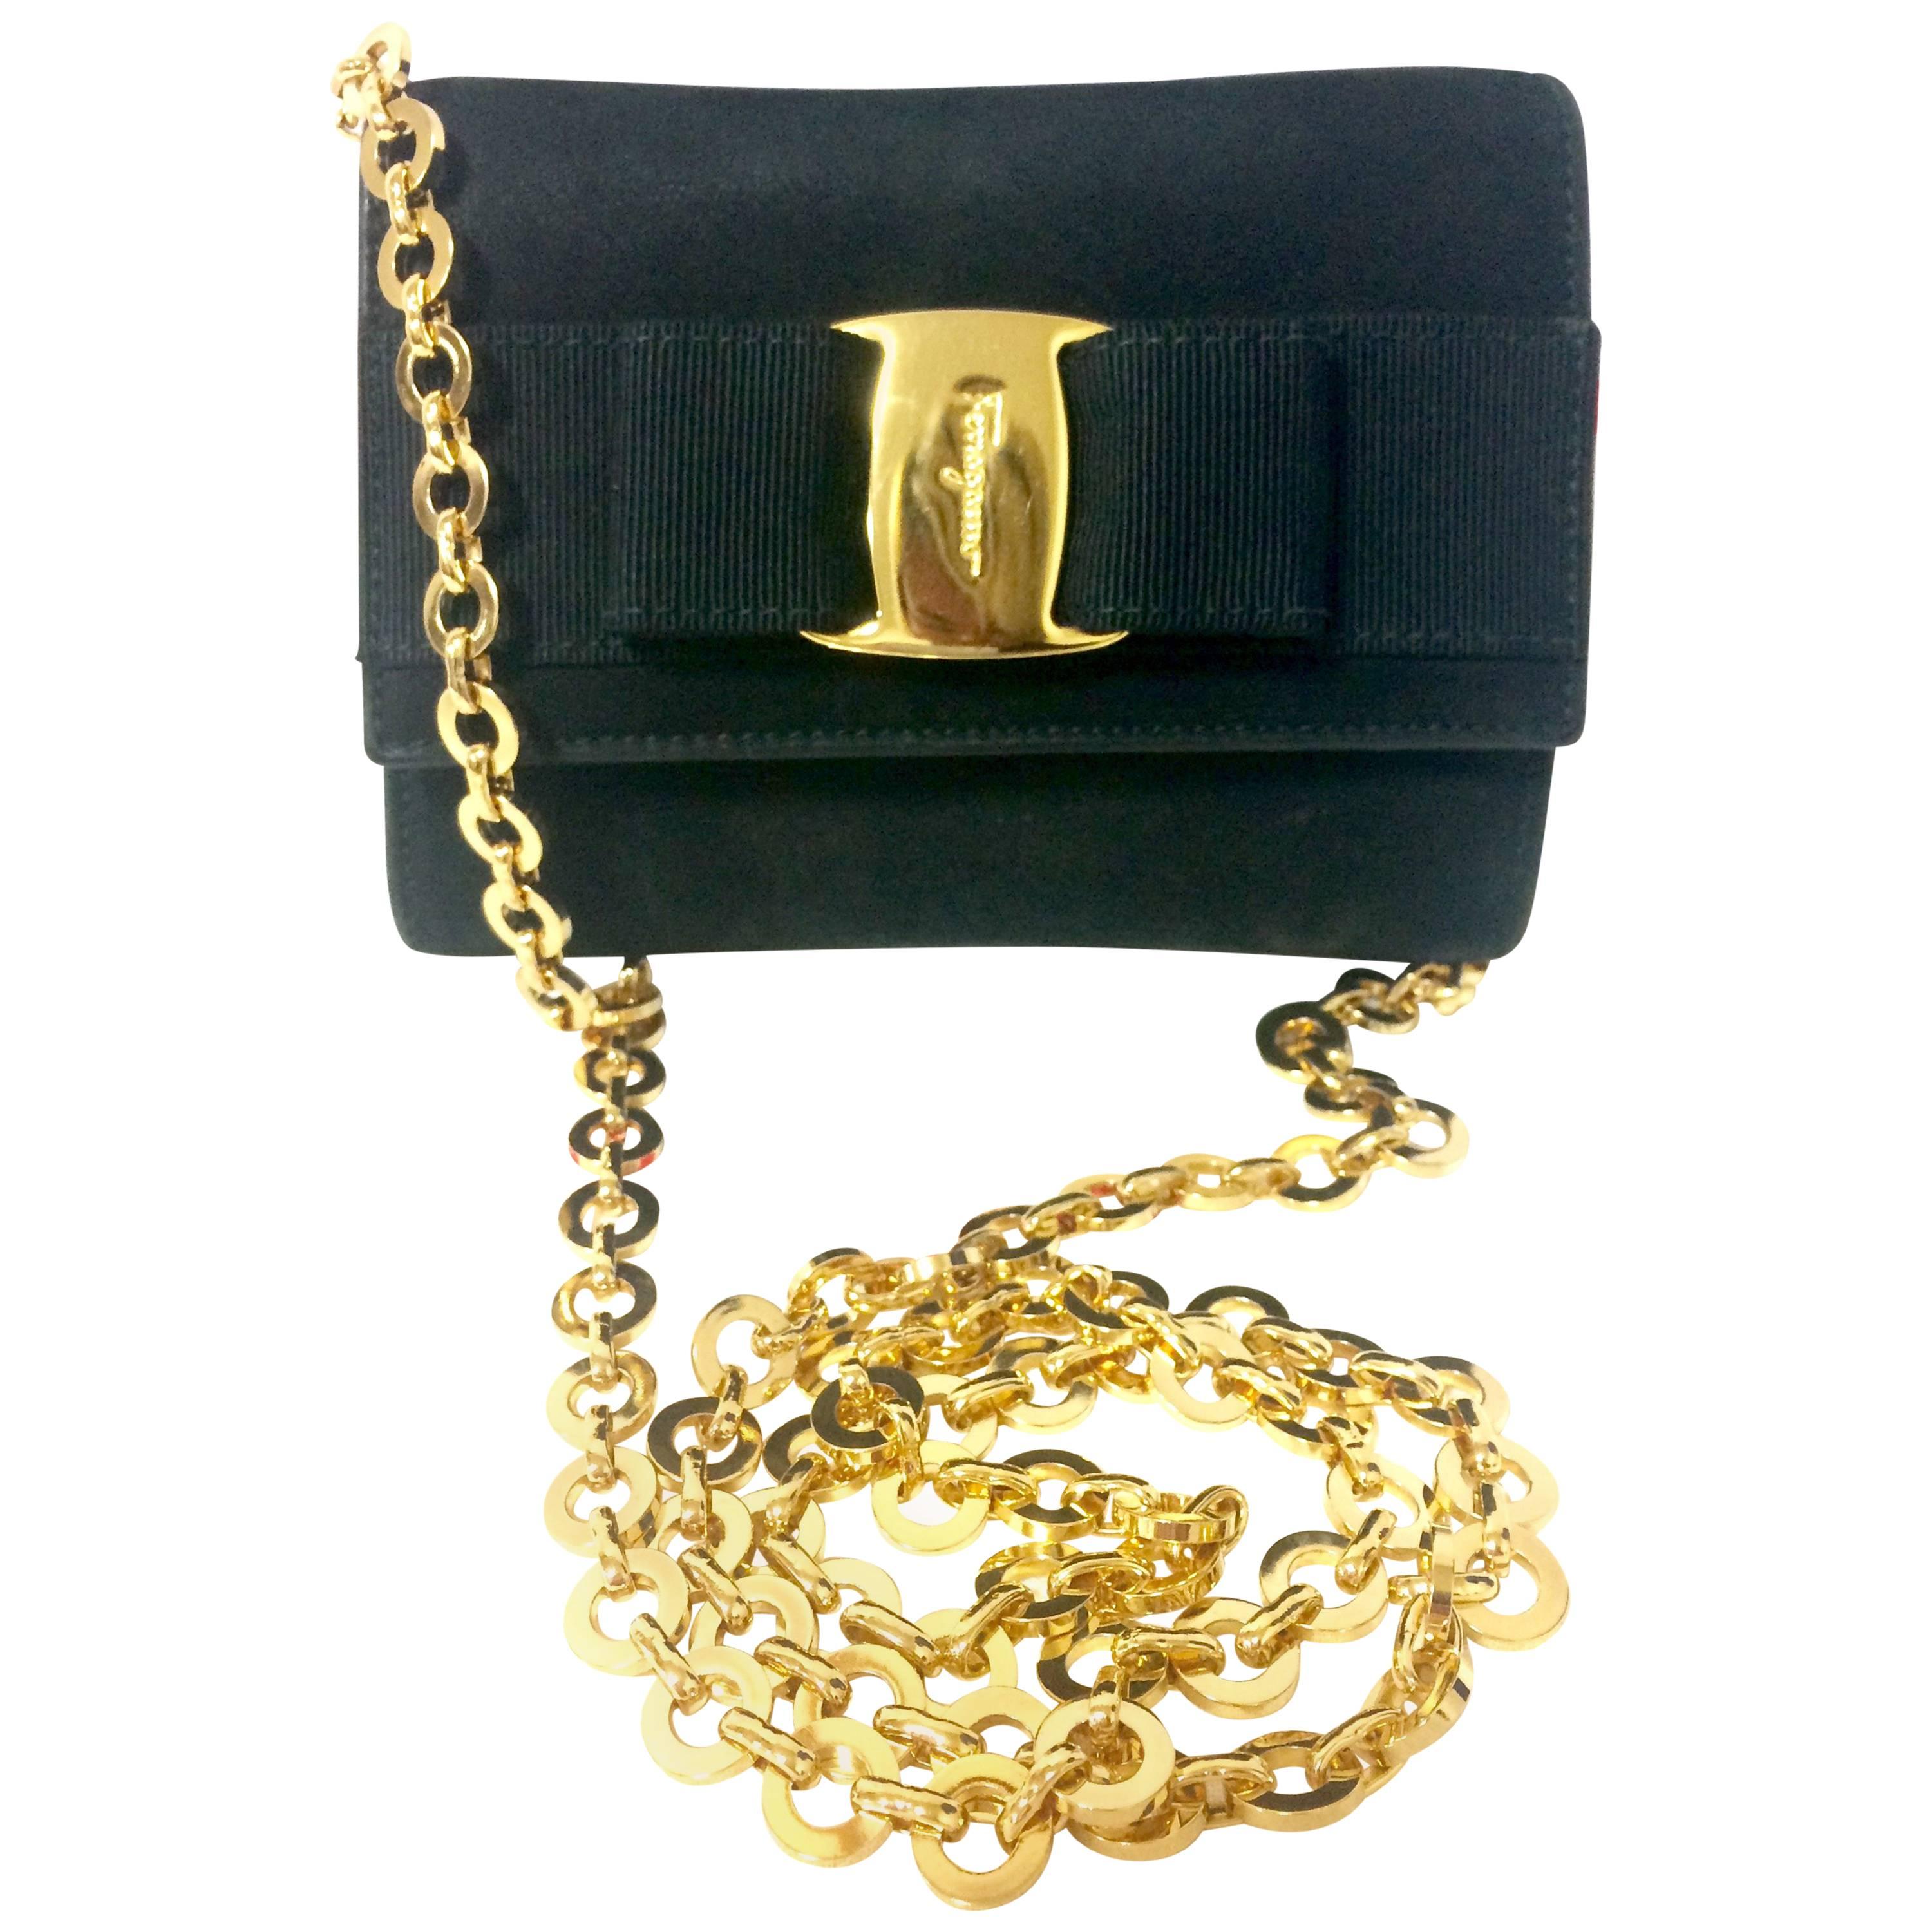 Vintage Salvatore Ferragamo black shoulder mini bag with gold chain and Vara bow For Sale